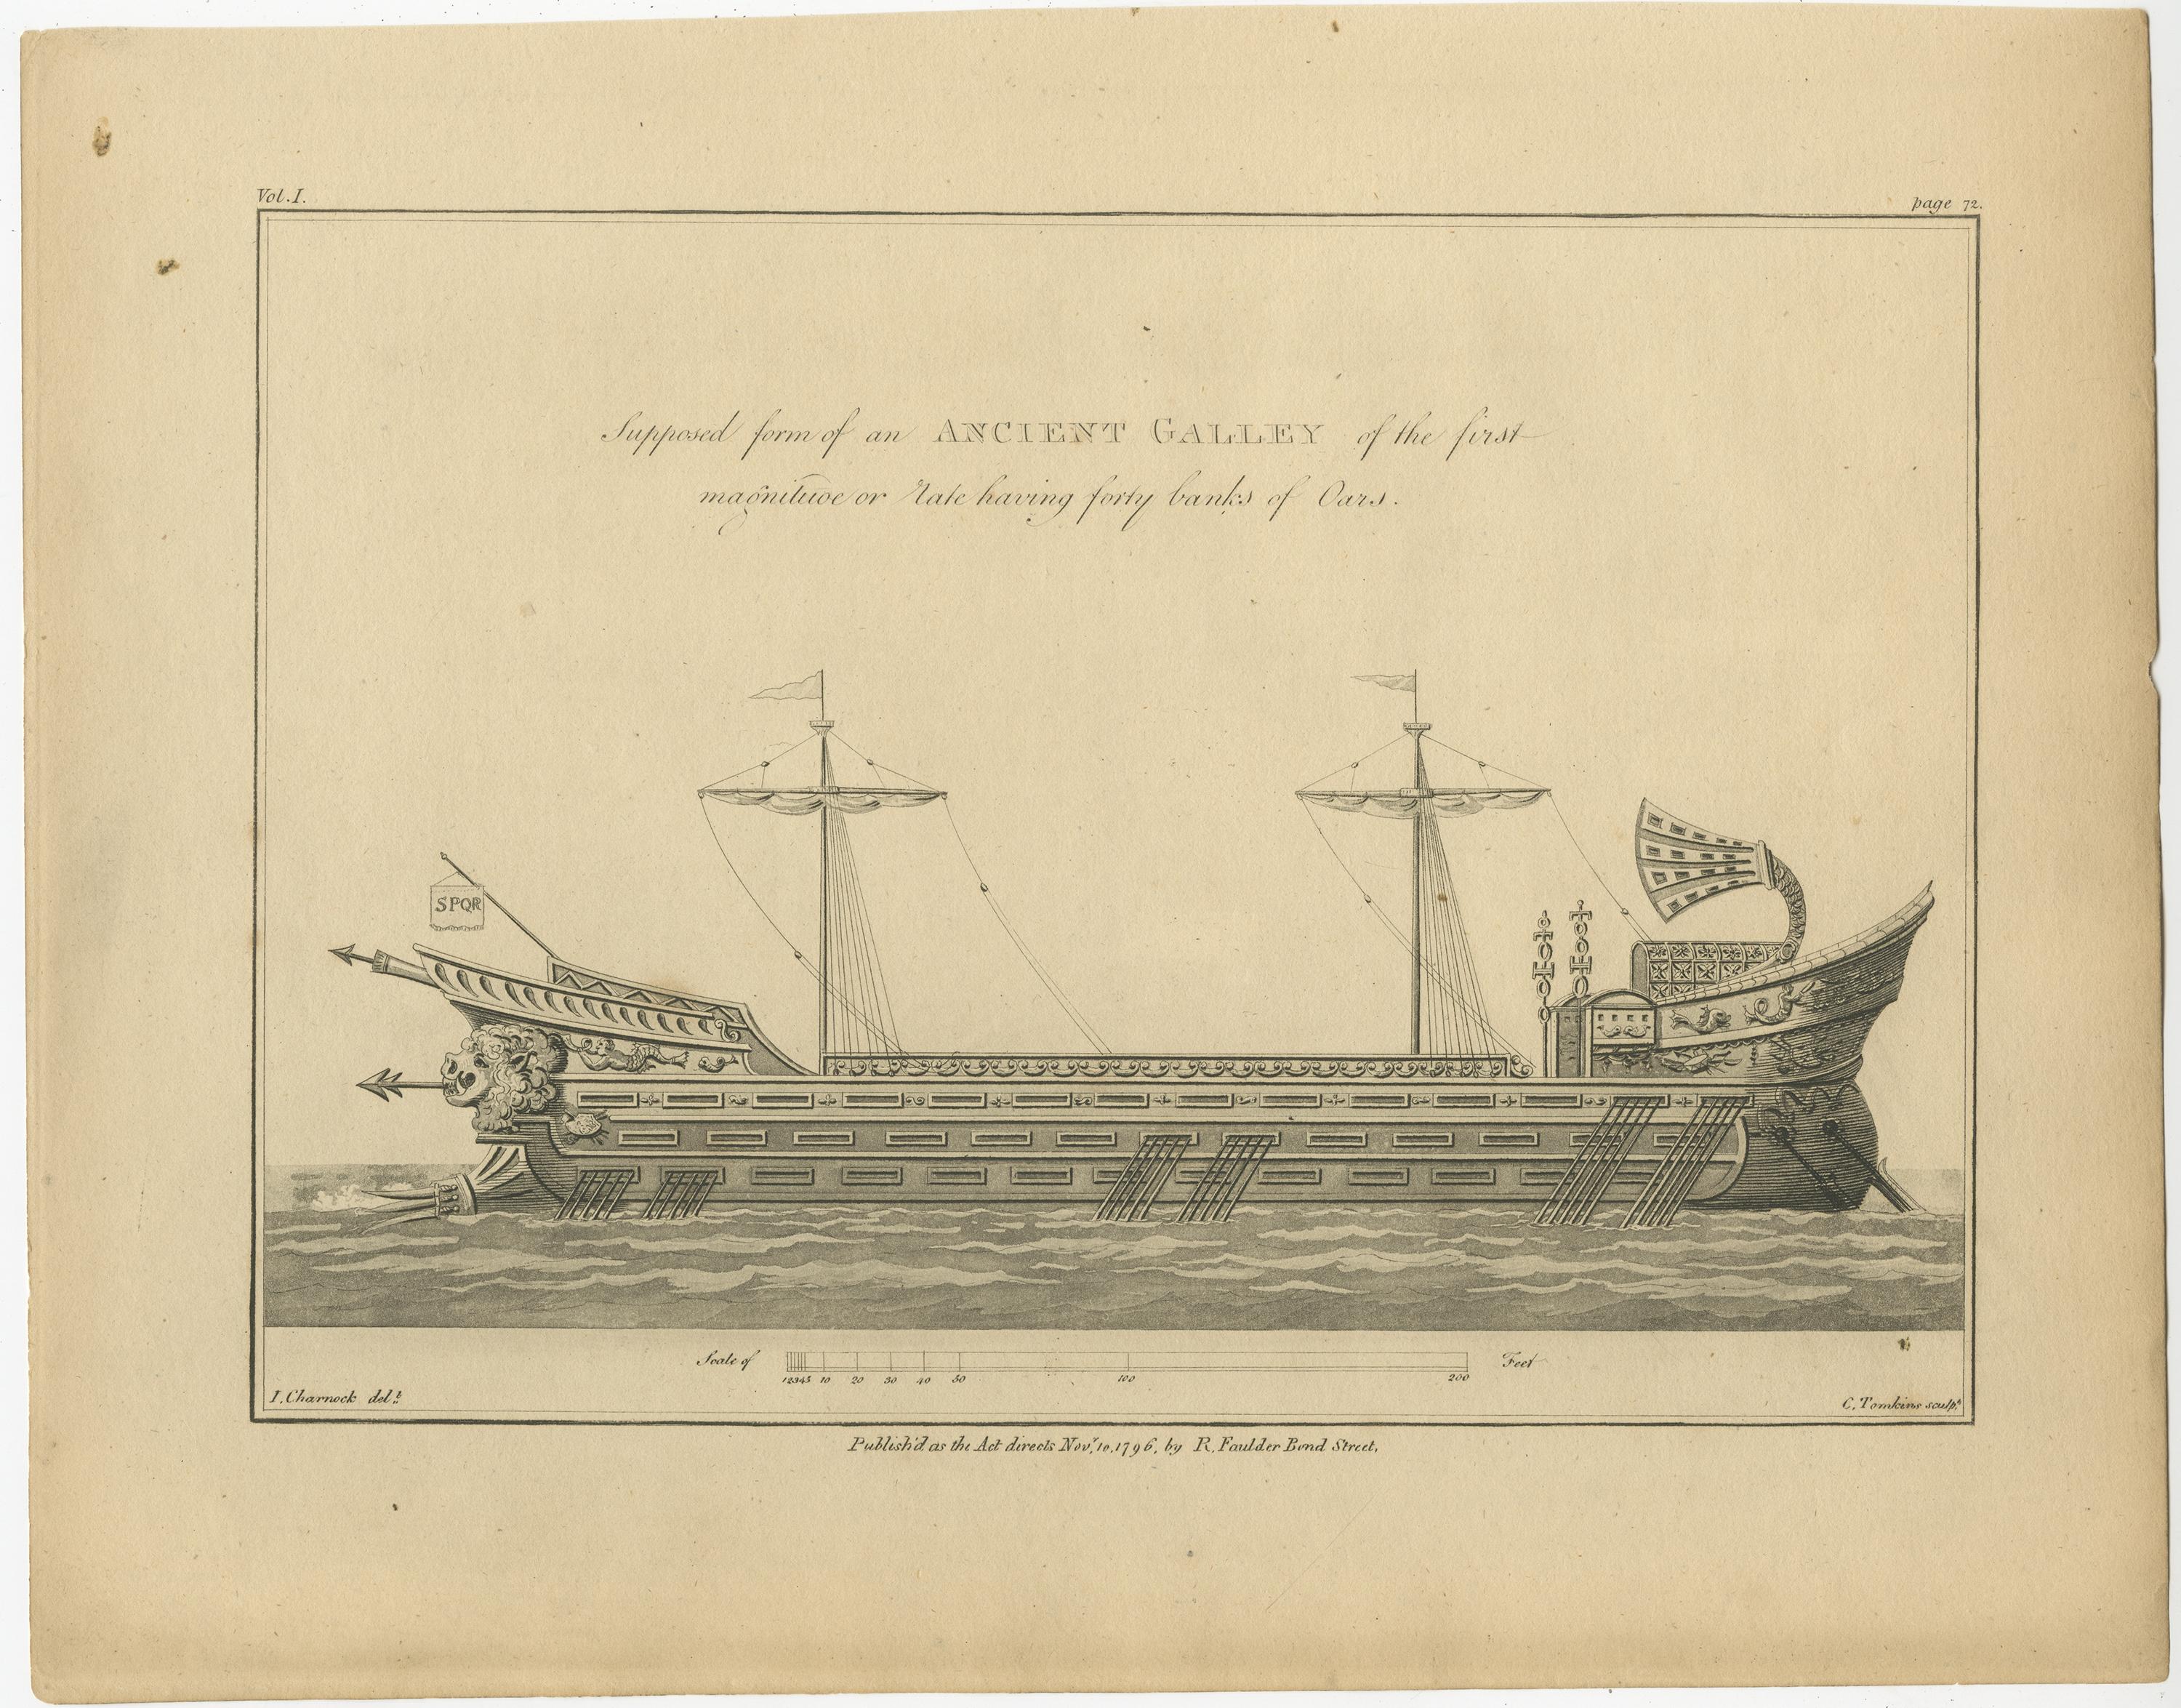 Antique print titled 'Supposed form of an Ancient Galley (..)'. 

View of an ancient galley. This print originates from John Charnock's 'History of Marine Architecture'. Published 1802. 


Artists and Engravers: John Charnock's 'History of